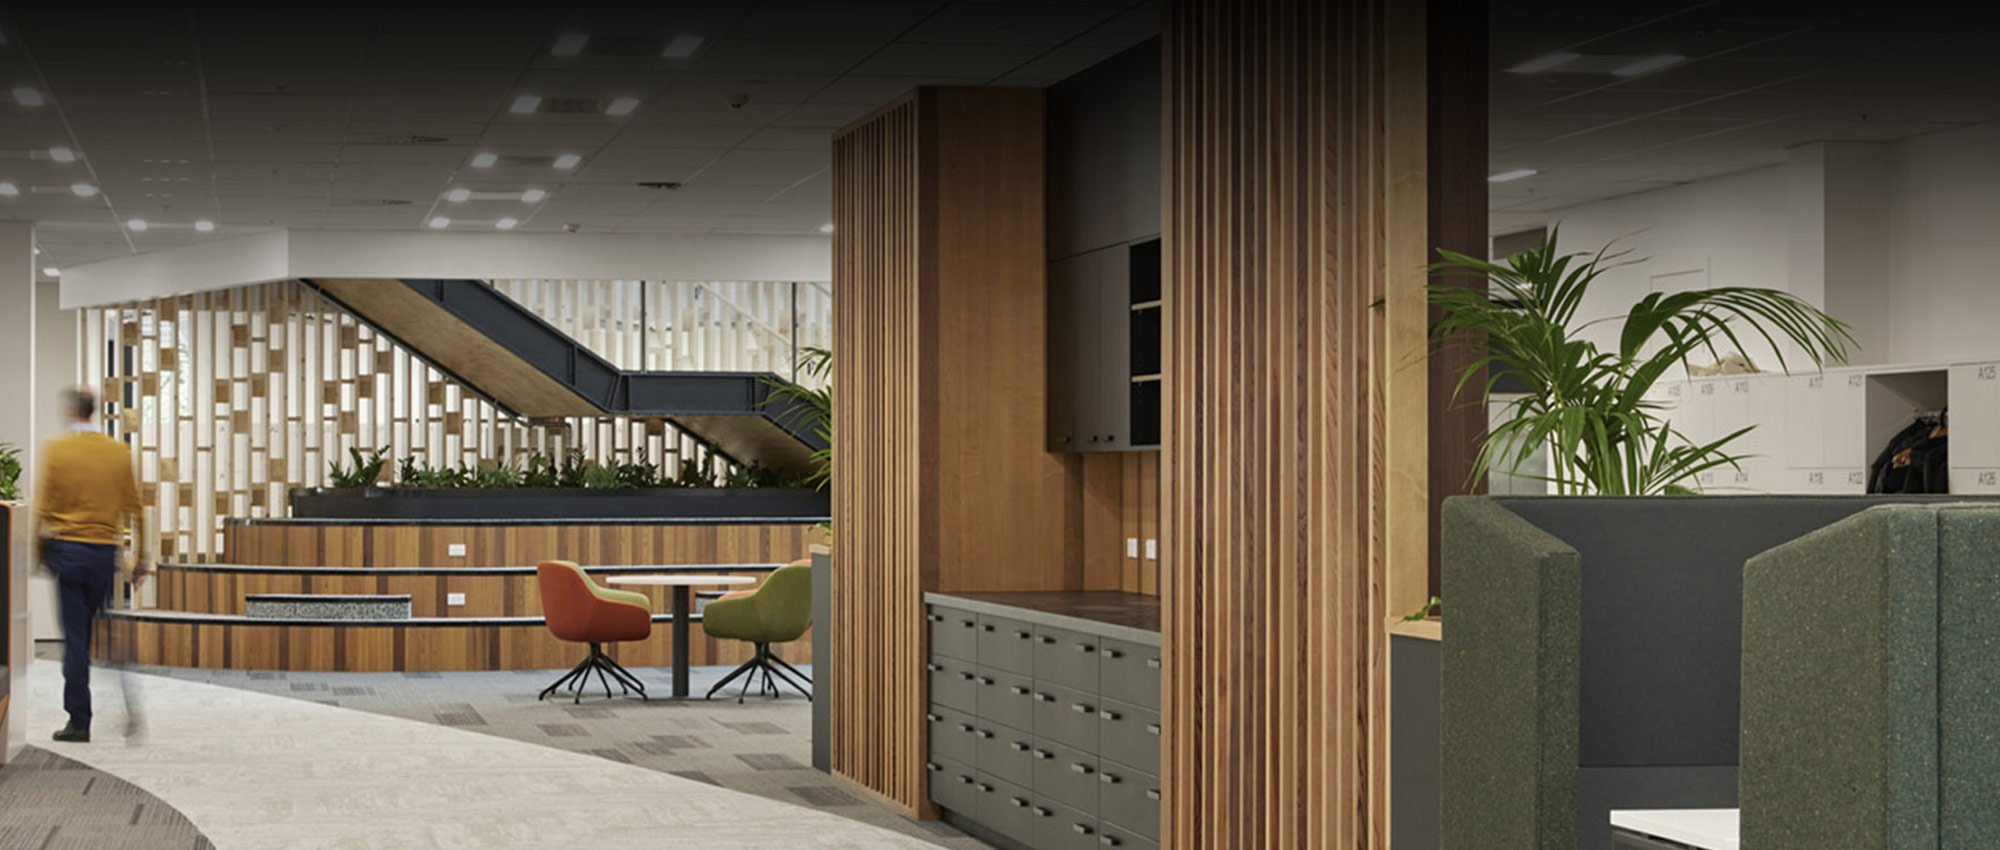 Commercial business lobby with elegant wood accents and designs implemented by Colourform Joinery